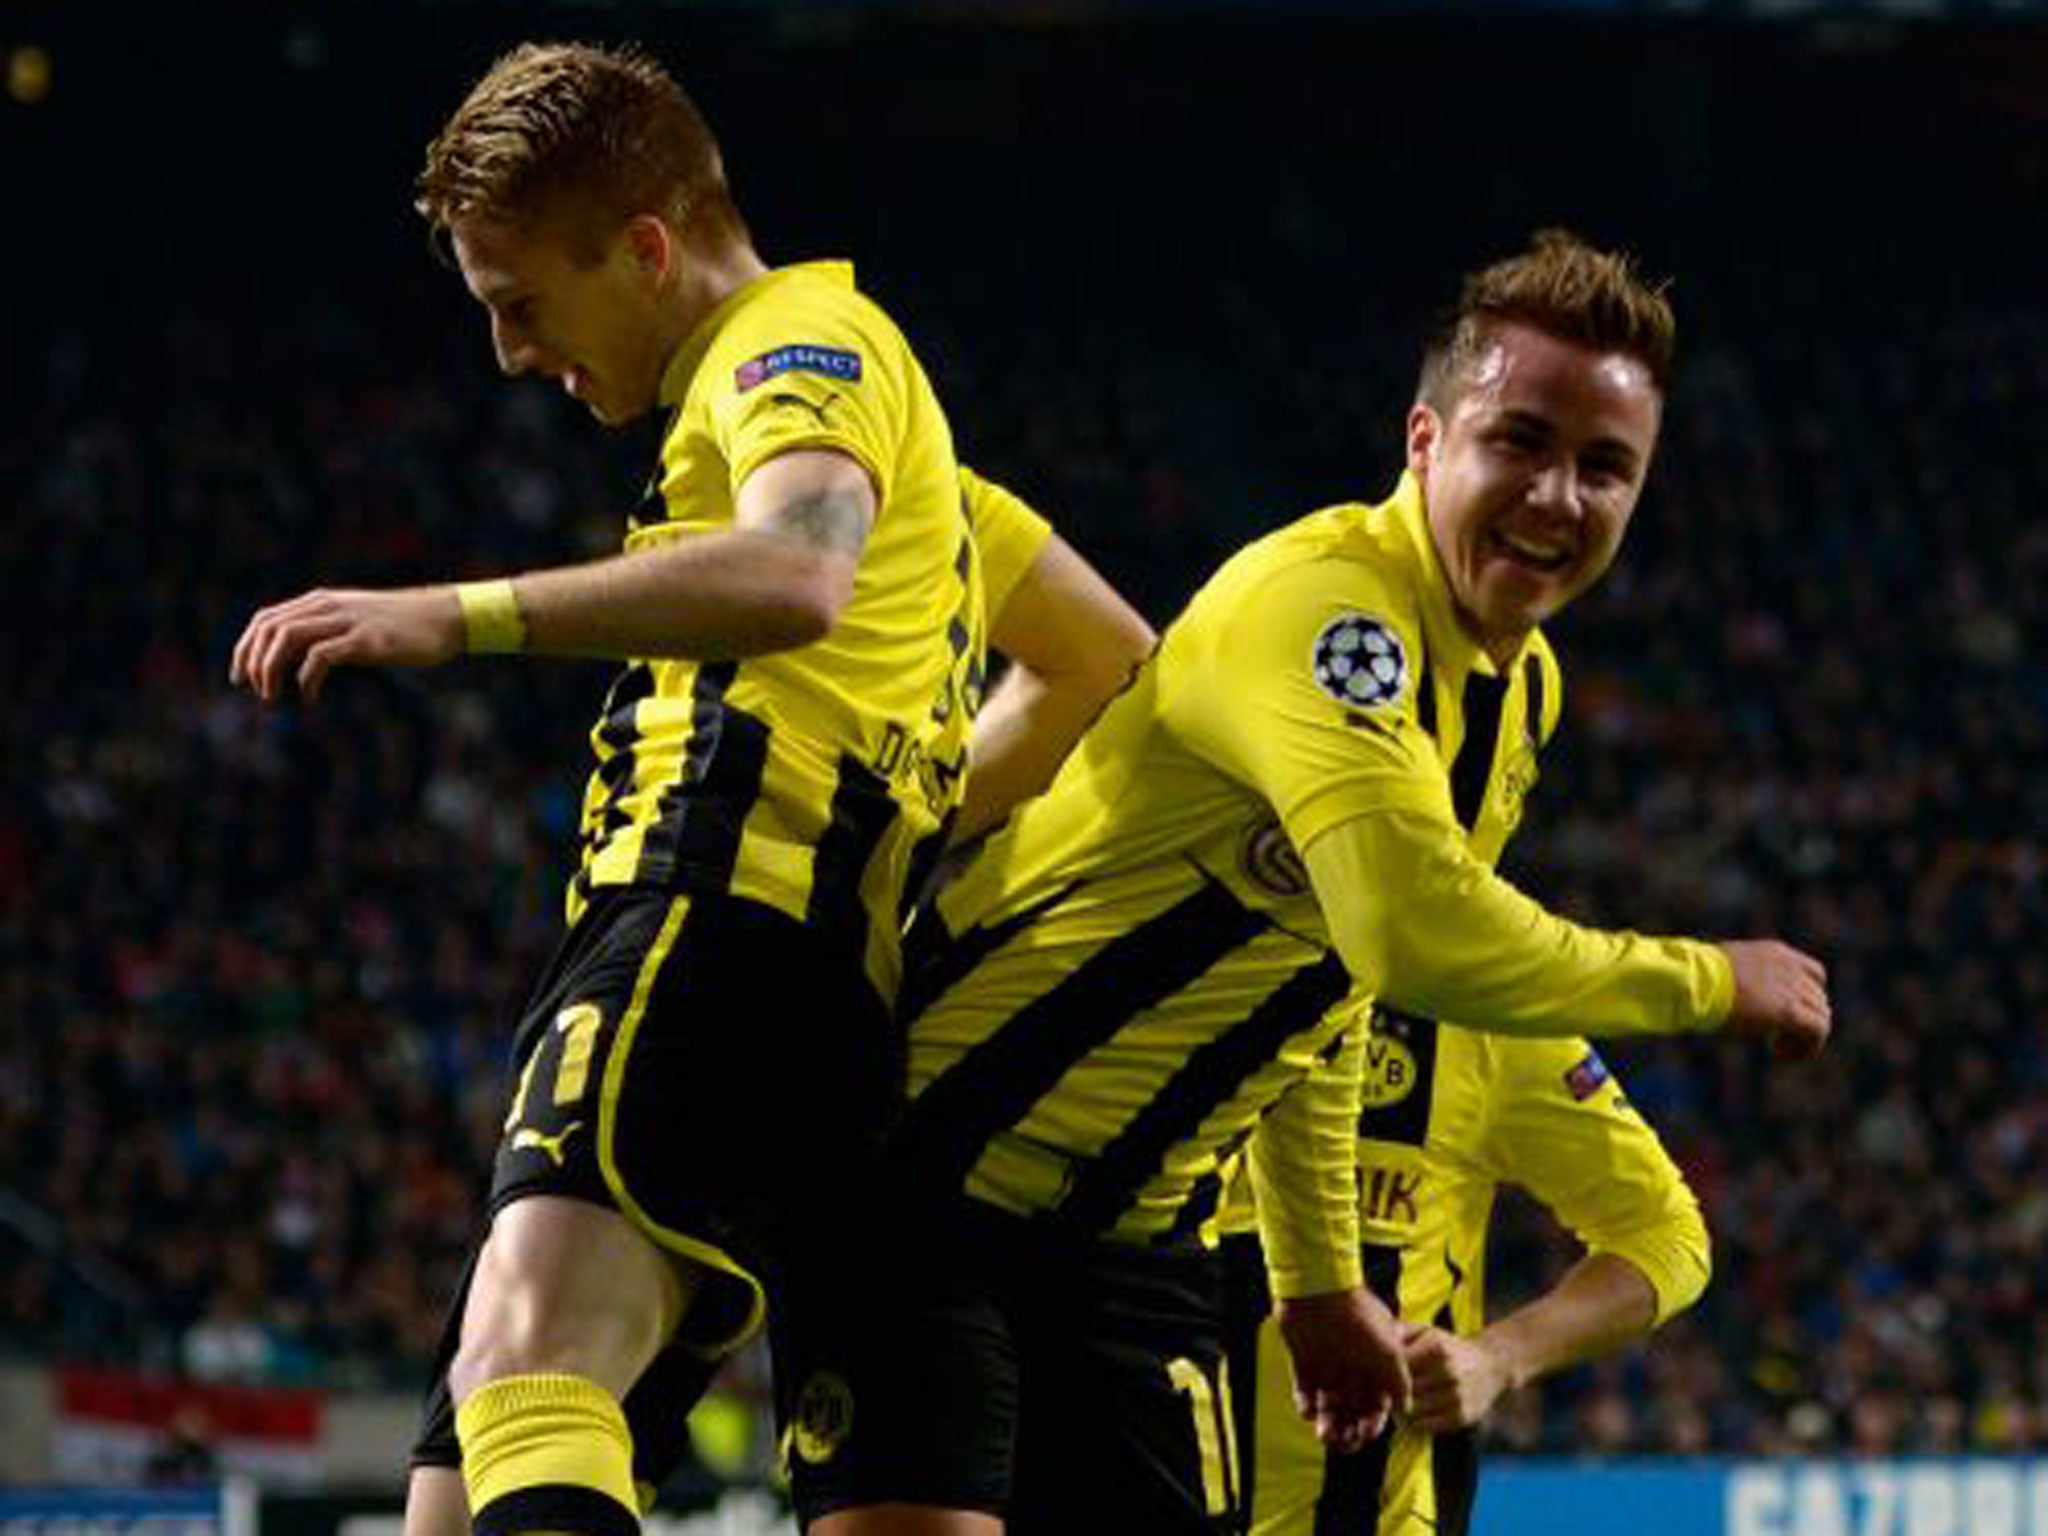 Marco Reus (left) and Mario Götze (right) have made Borussia Dortmund Champions League contenders